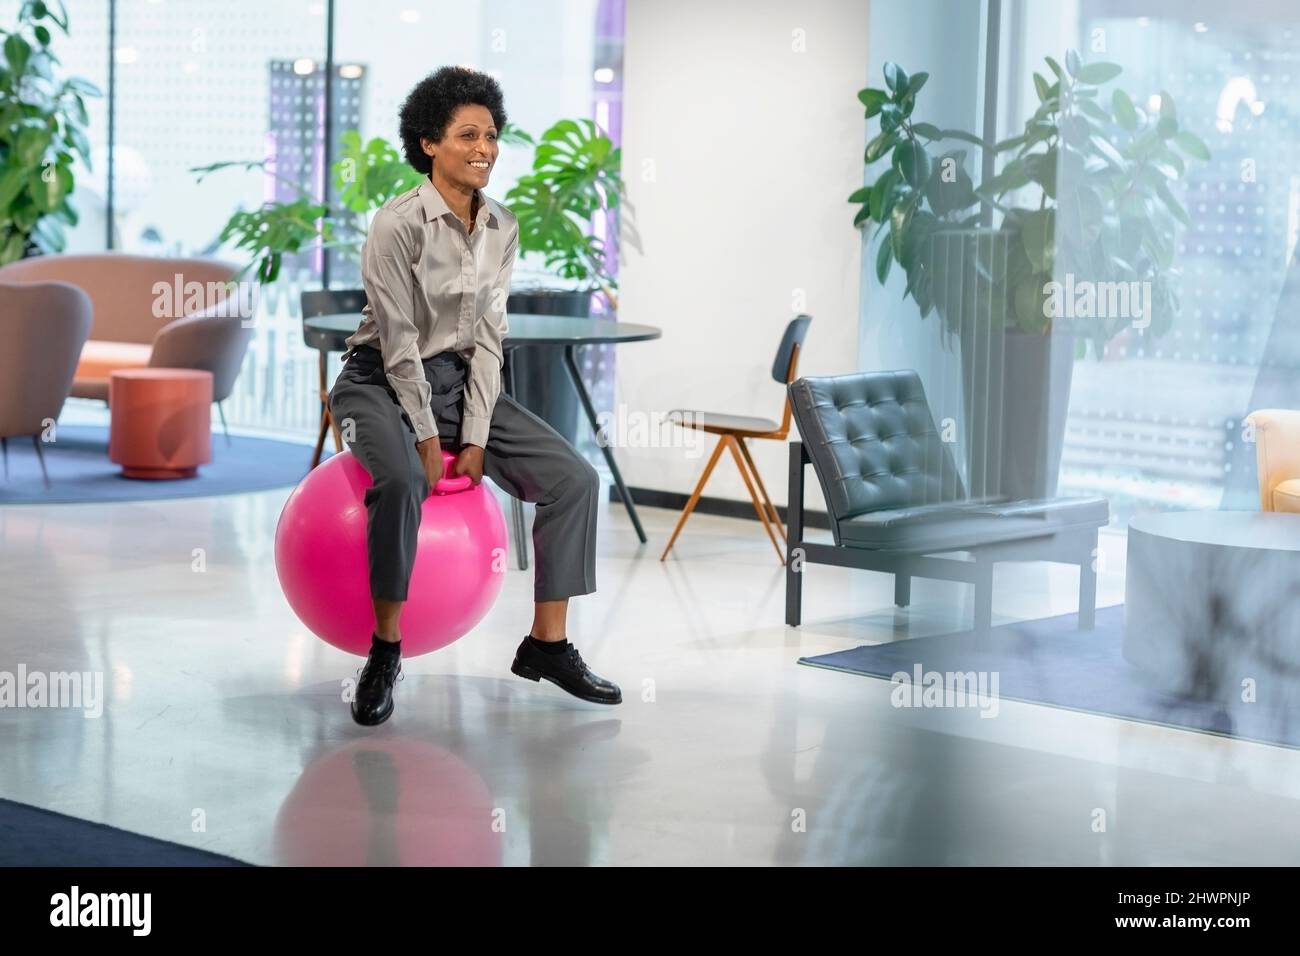 Manager bouncing on hopper ball in office Stock Photo